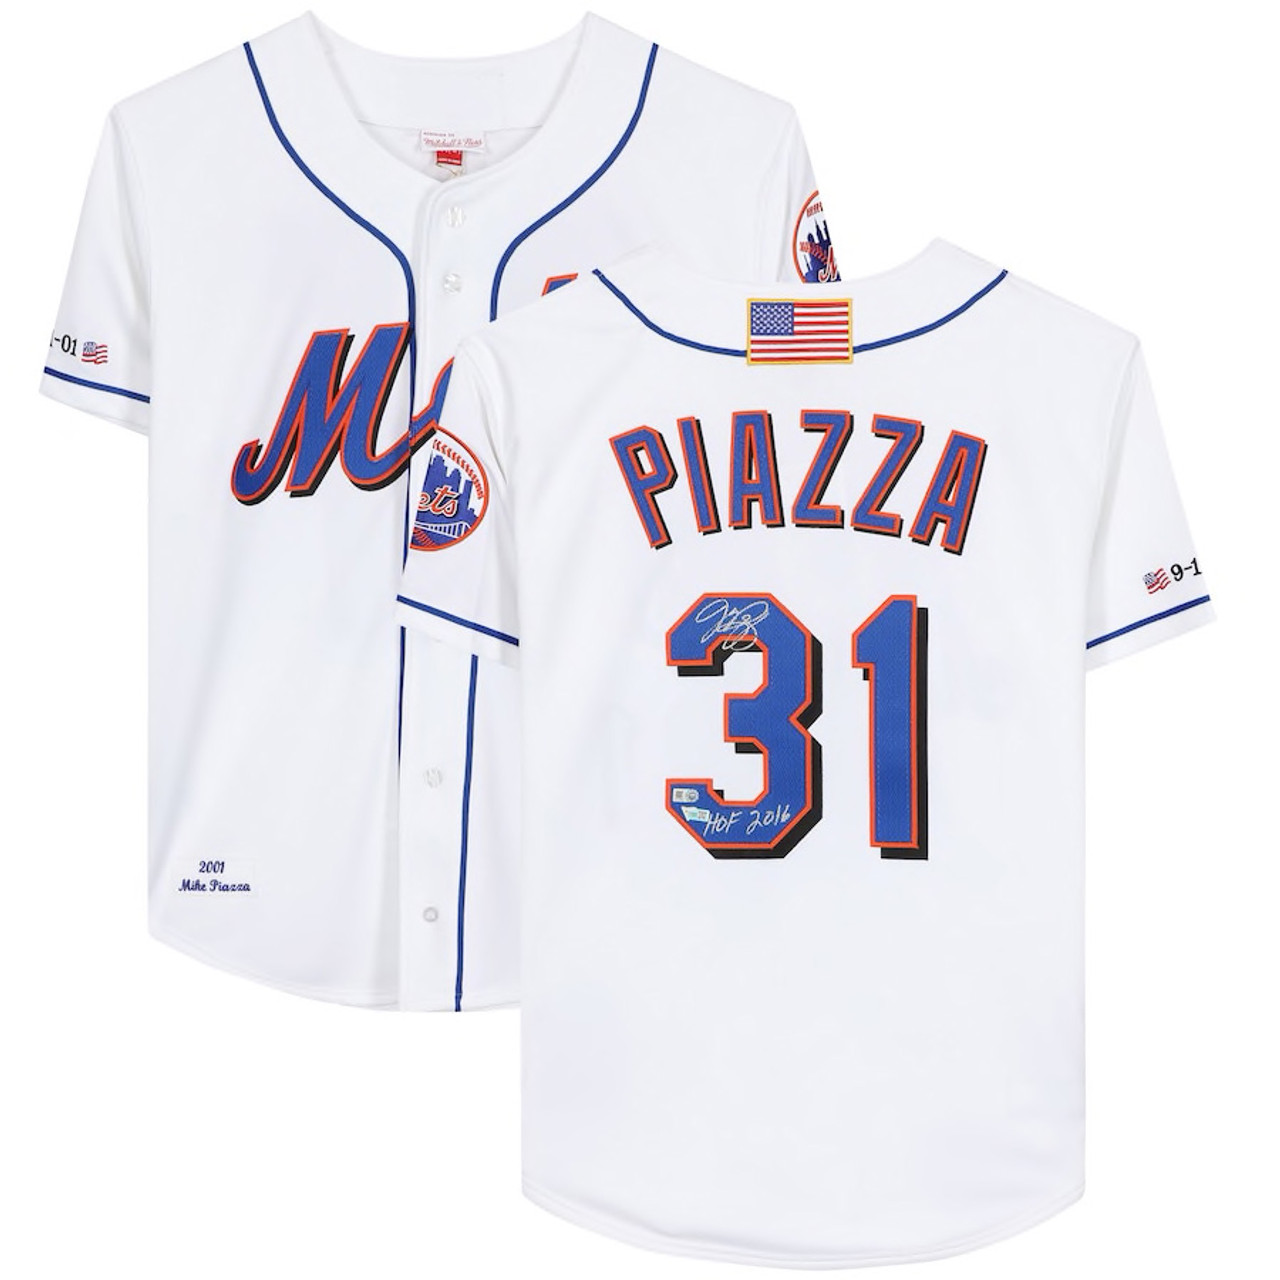 MIKE PIAZZA Autographed and Inscribed HOF 2016 New York Mets Authentic  Jersey FANATICS - Game Day Legends